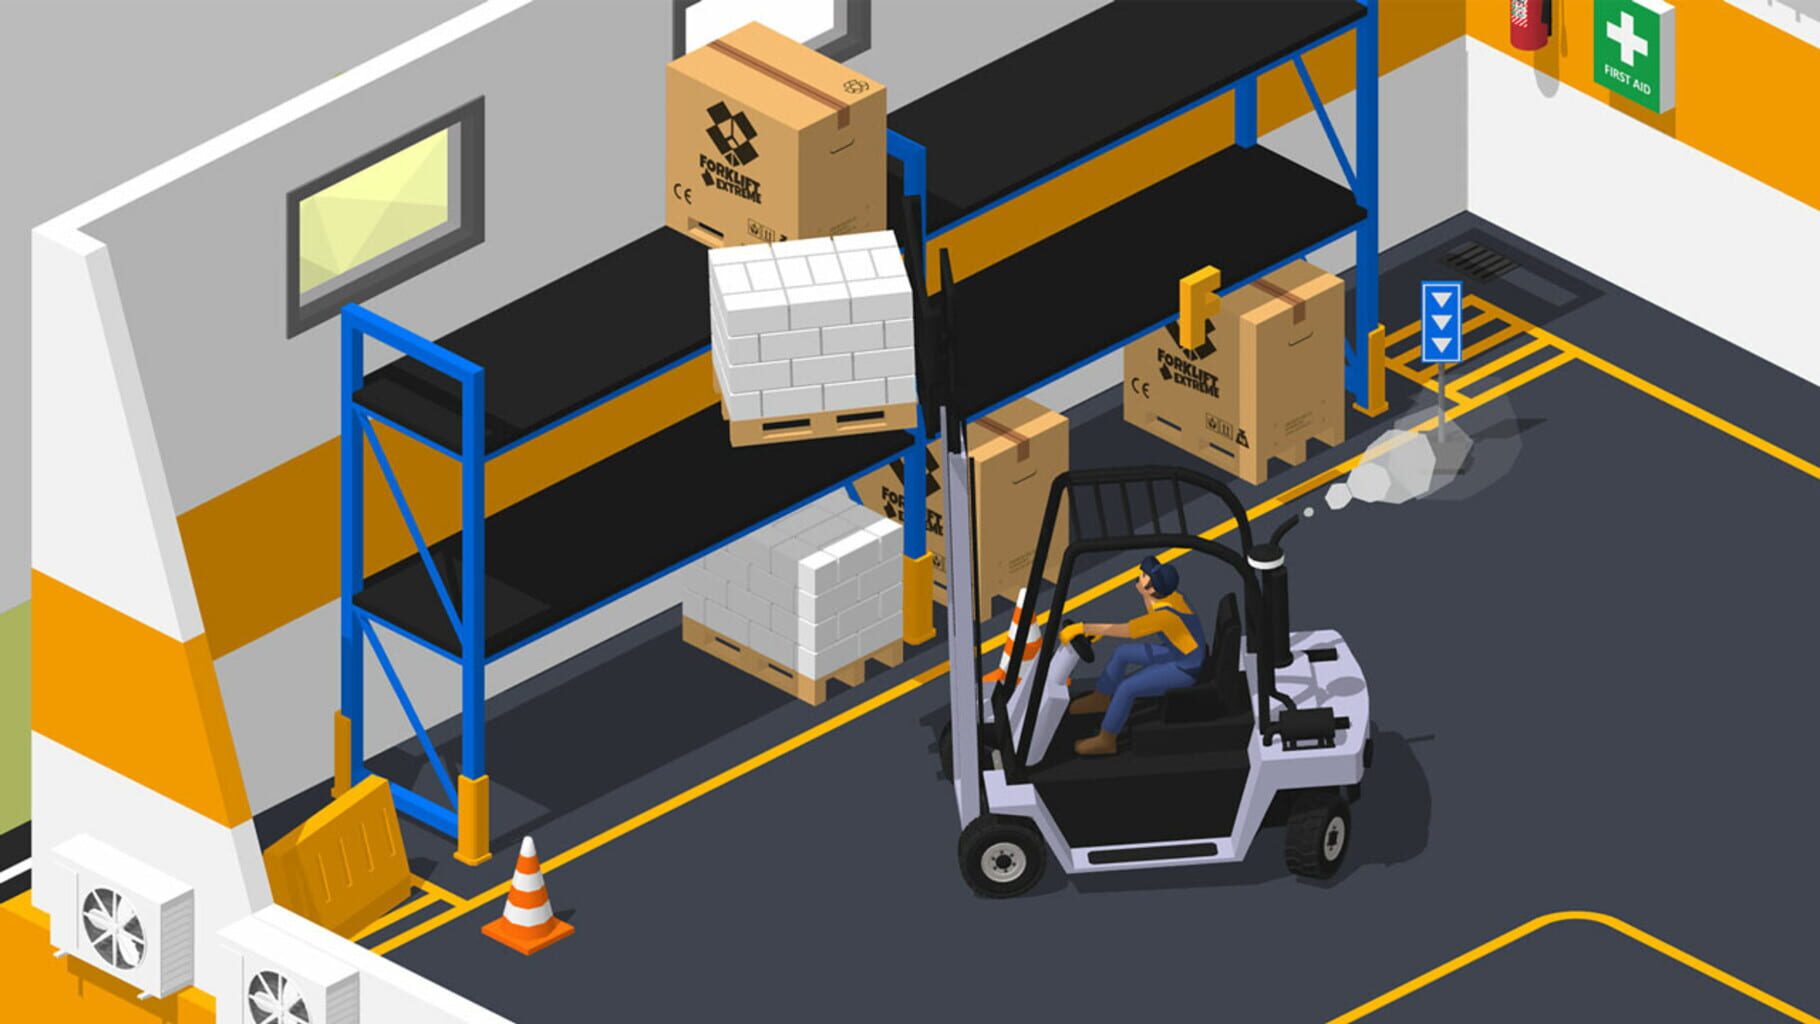 Forklift Extreme: Deluxe Edition screenshot